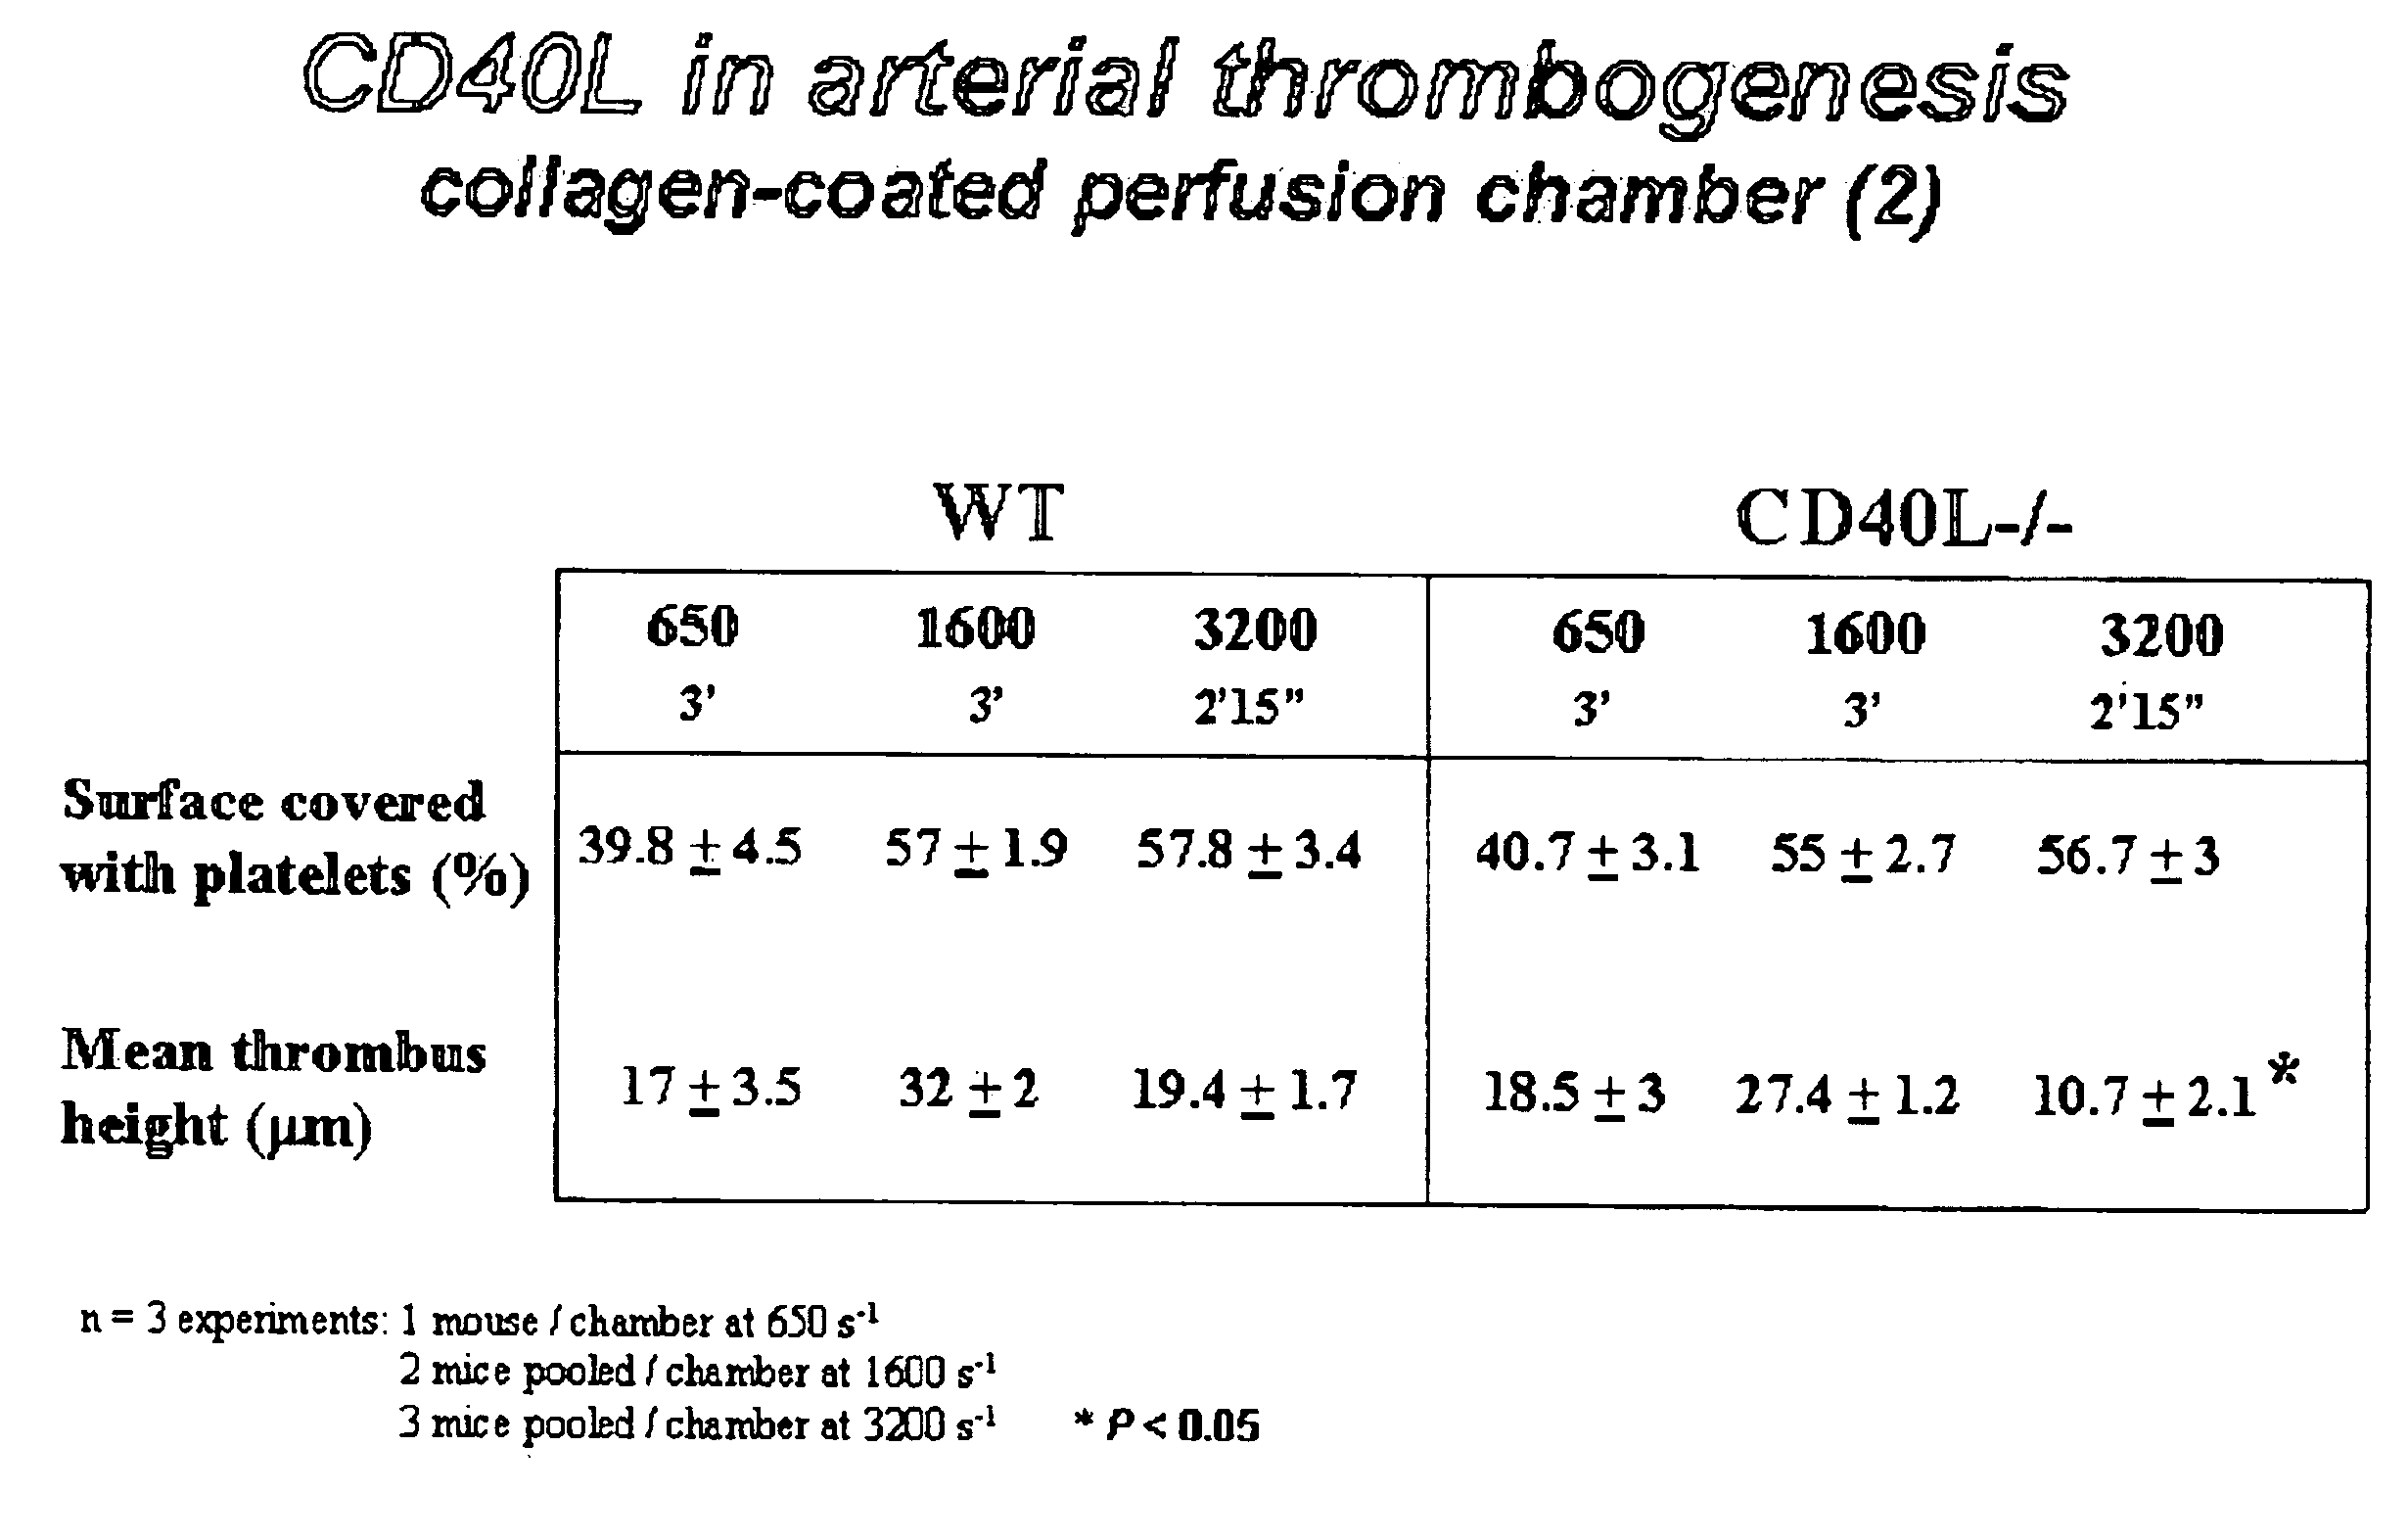 Compounds and methods for the modulation of CD154